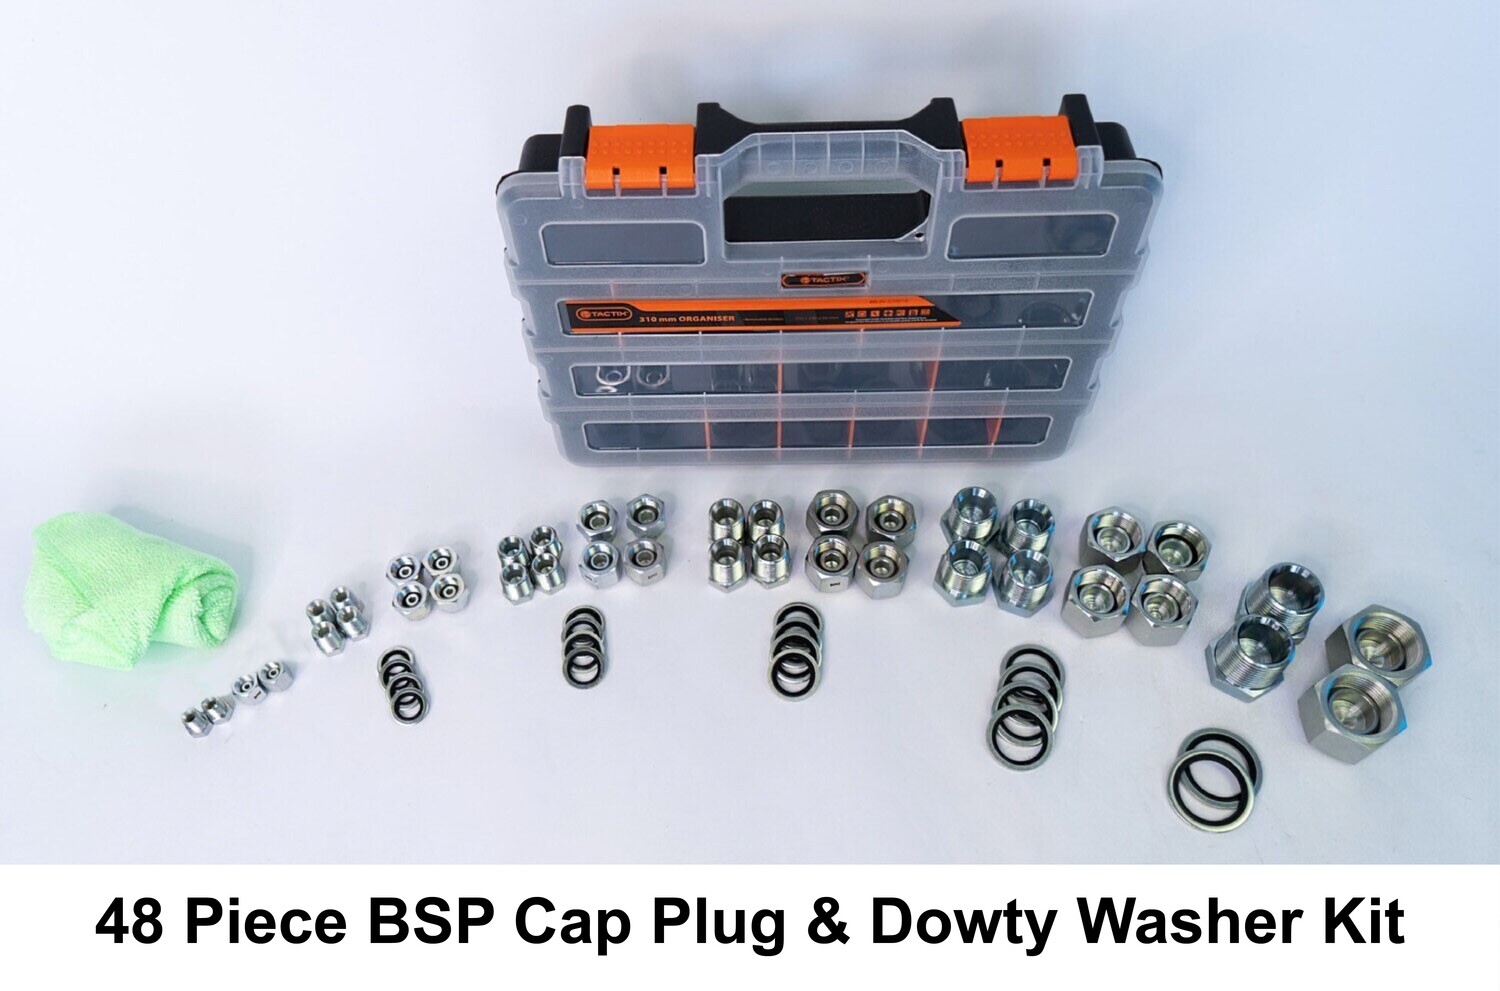 BSP Plug, Cap & Dowty Washer Kit 48 pc in Strong Plastic Case